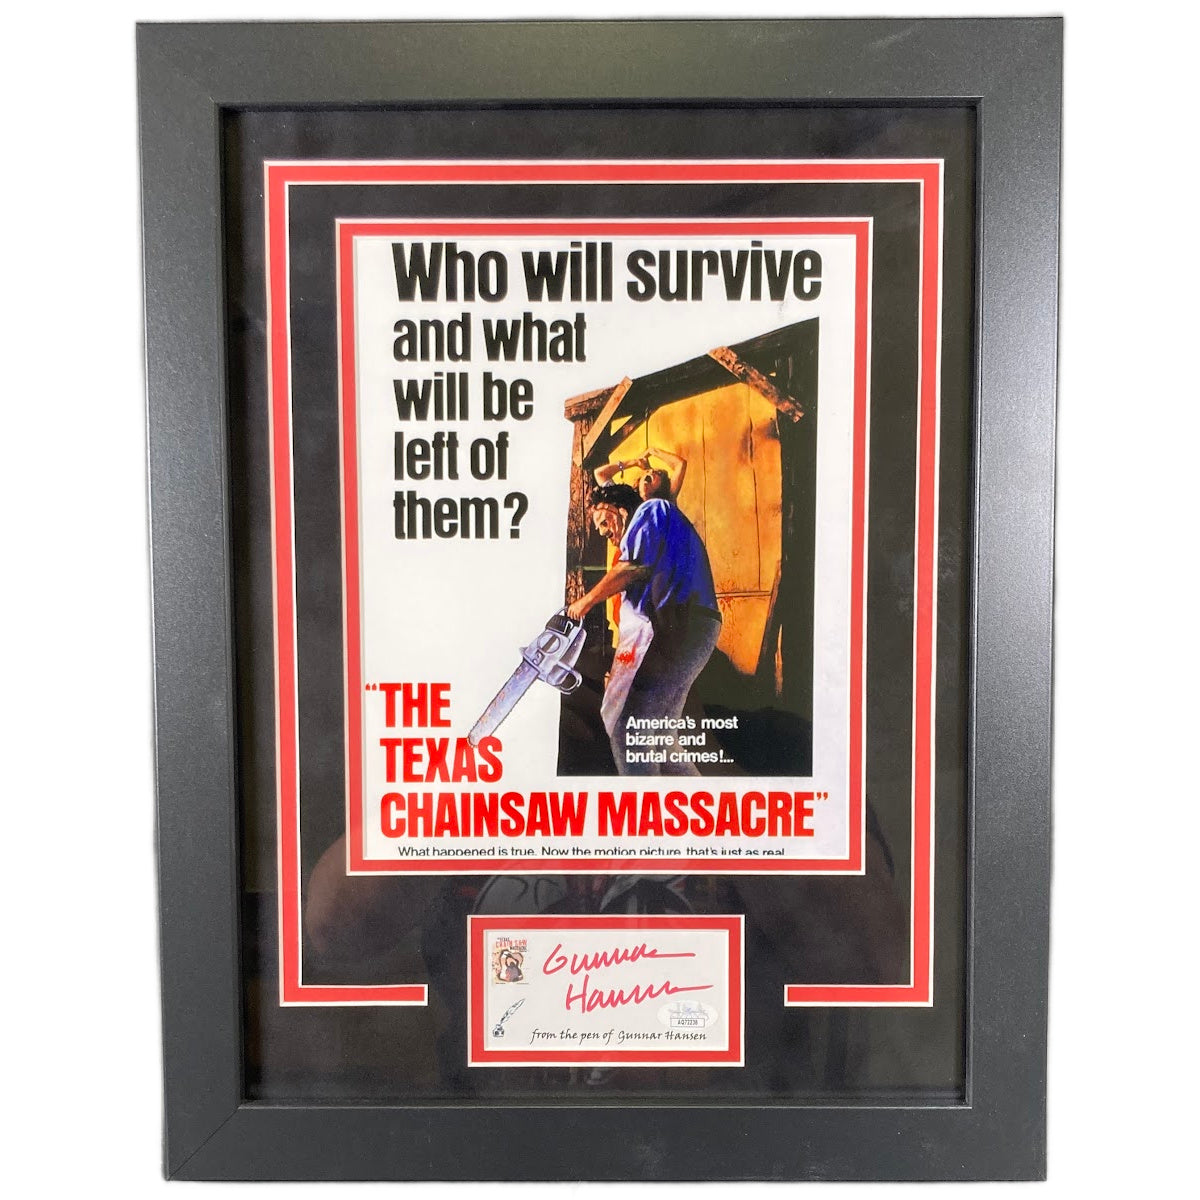 Gunnar Hansen The Texas Chainsaw Massacre Autographed Signed 11x14 Framed Poster Photo